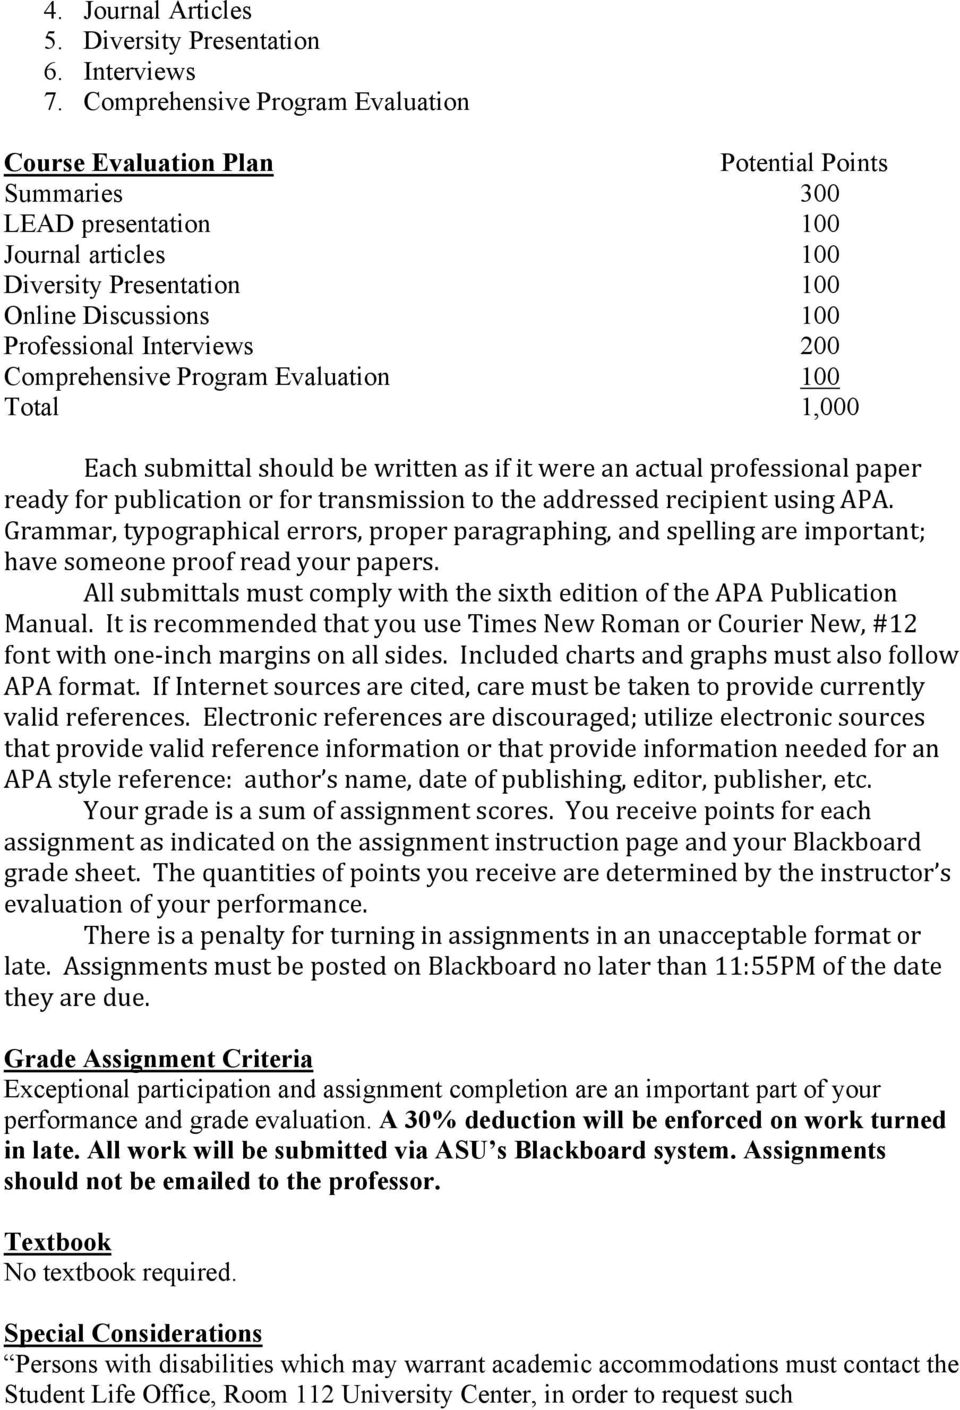 Interviews 200 Comprehensive Program Evaluation 100 Total 1,000 Each submittal should be written as if it were an actual professional paper ready for publication or for transmission to the addressed